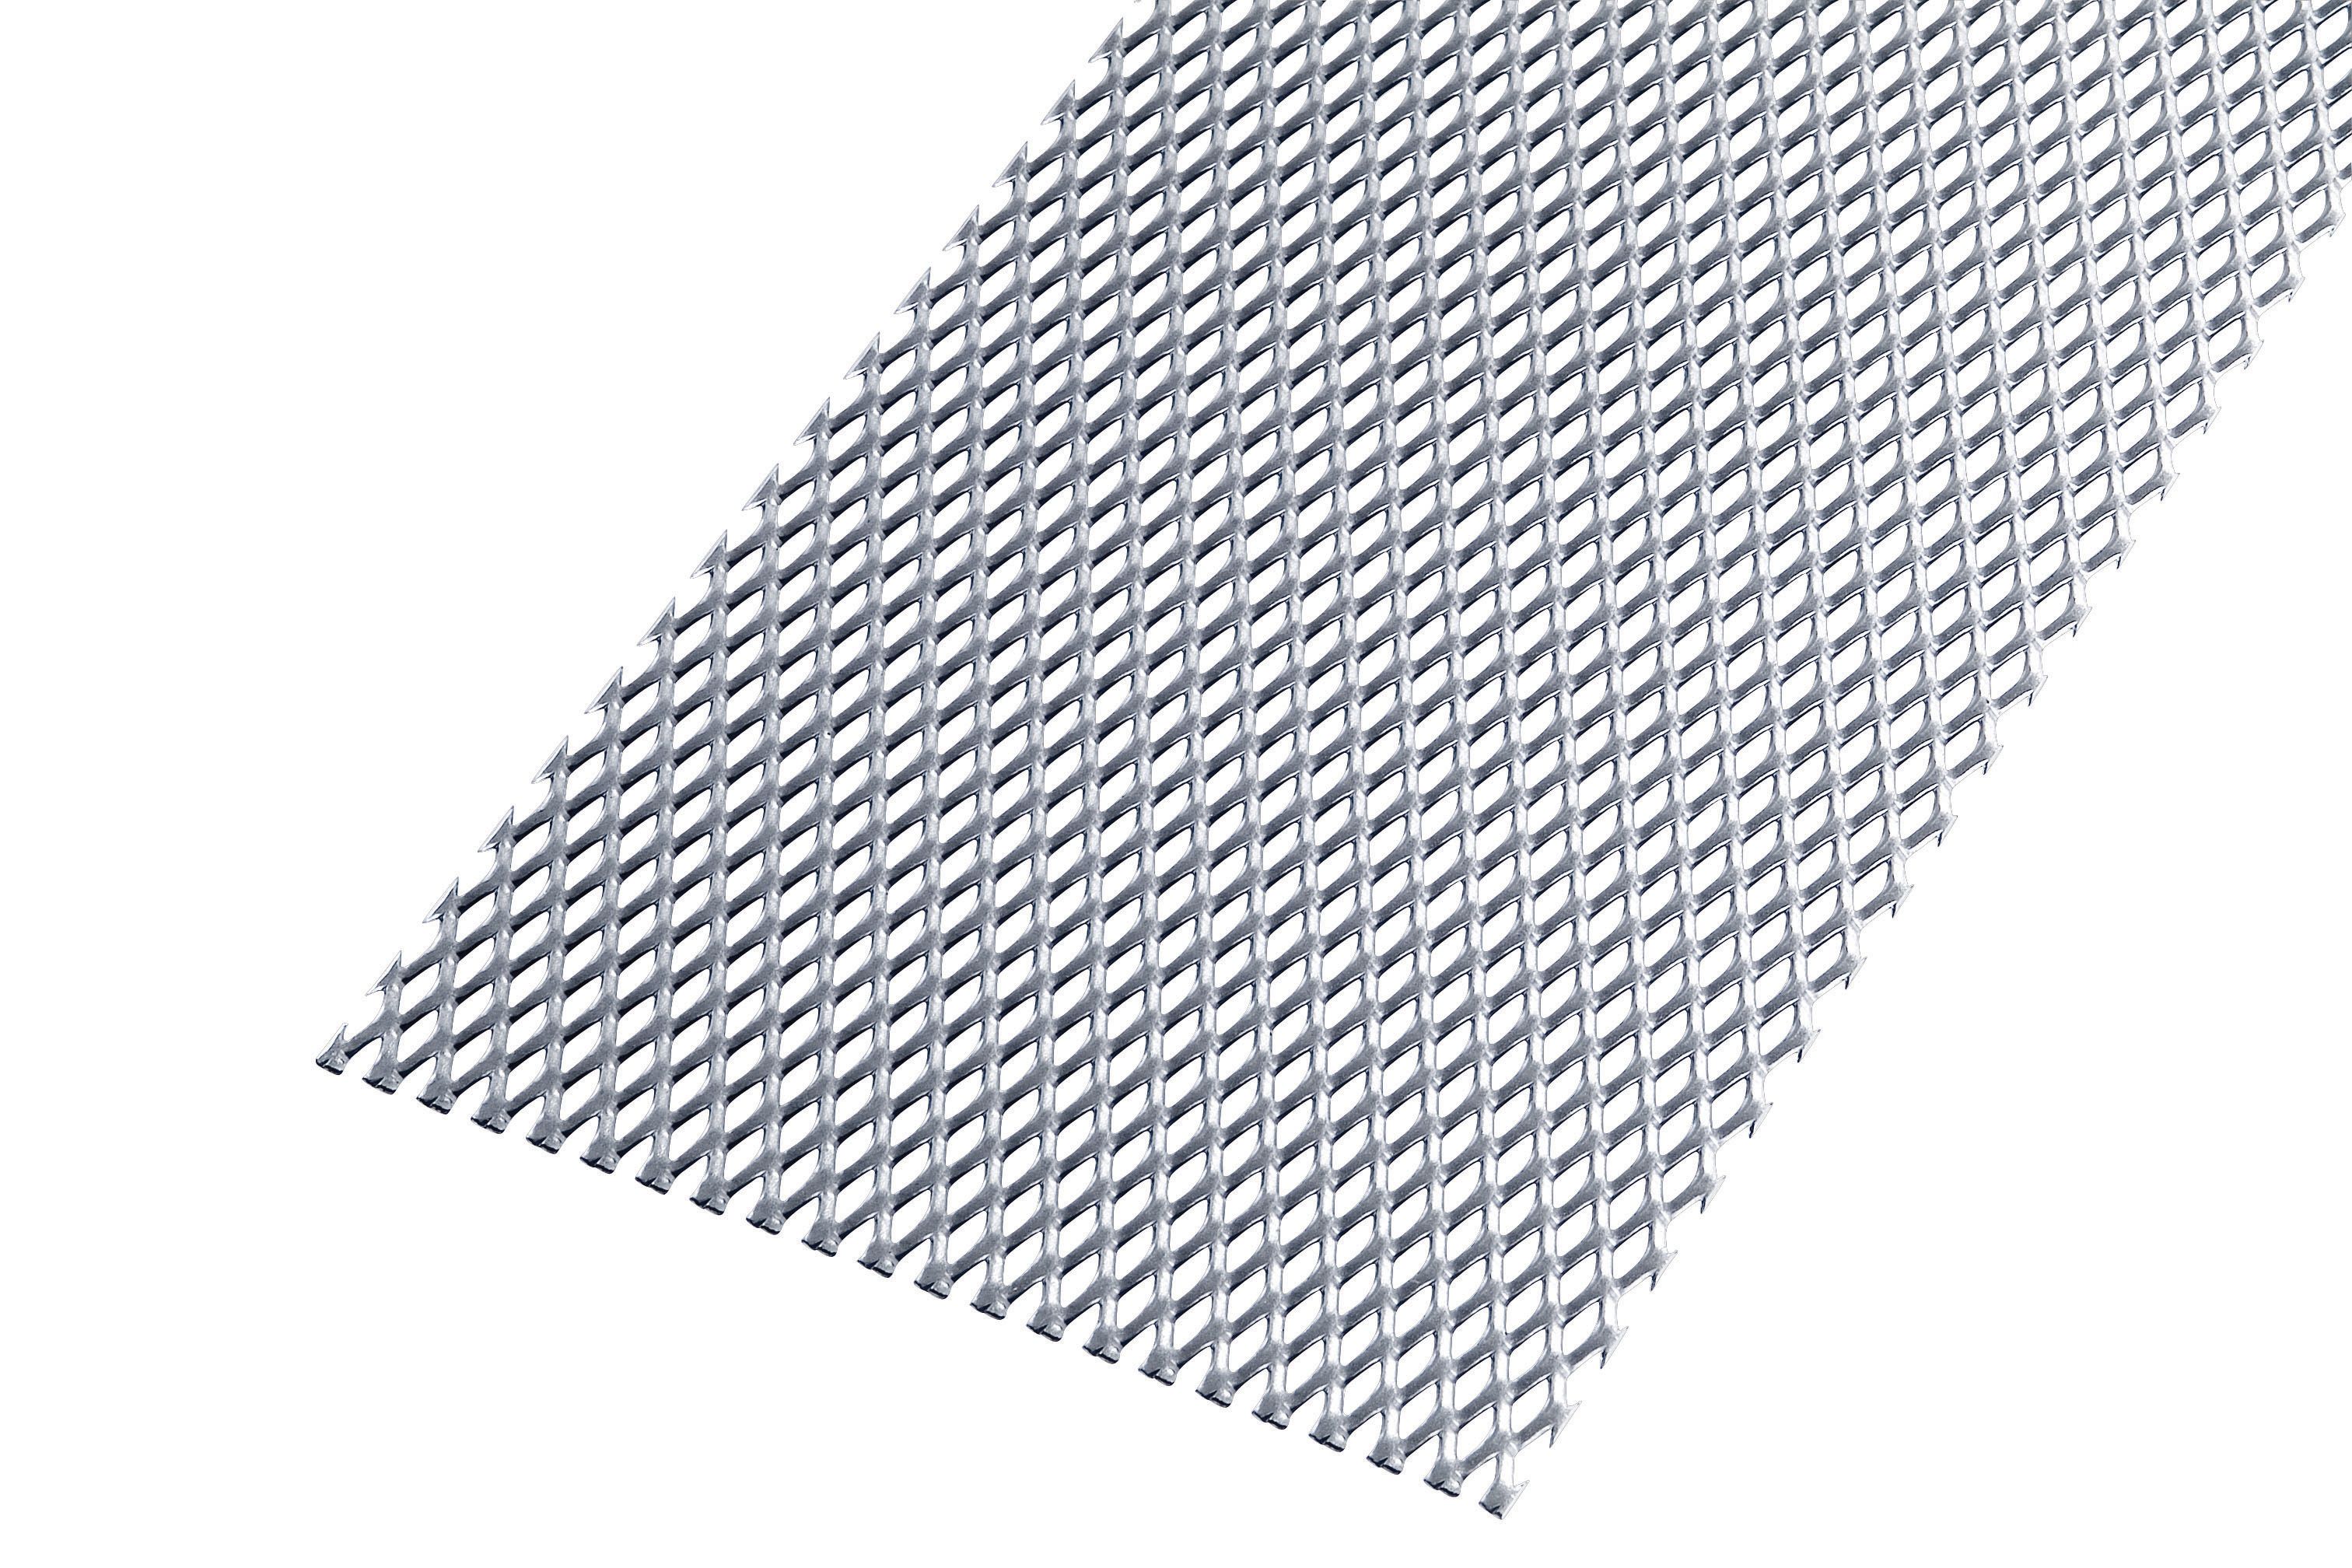 Rothley Perforated Steel Stretched Metal Sheet - 300 x 2.20 x 1000mm